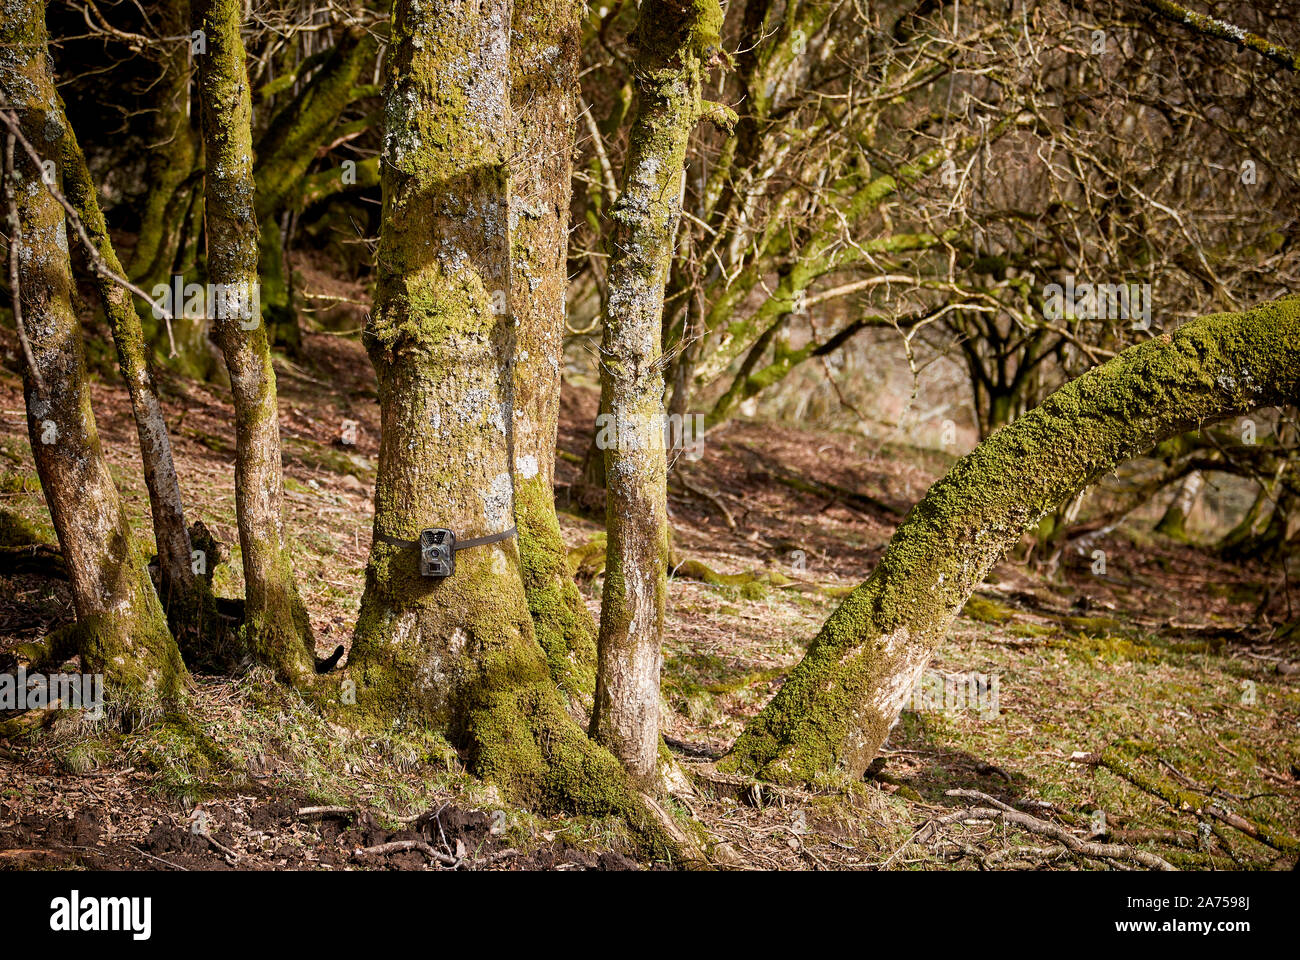 Camouflaged trail camera attached at base of tree in woodland Stock Photo